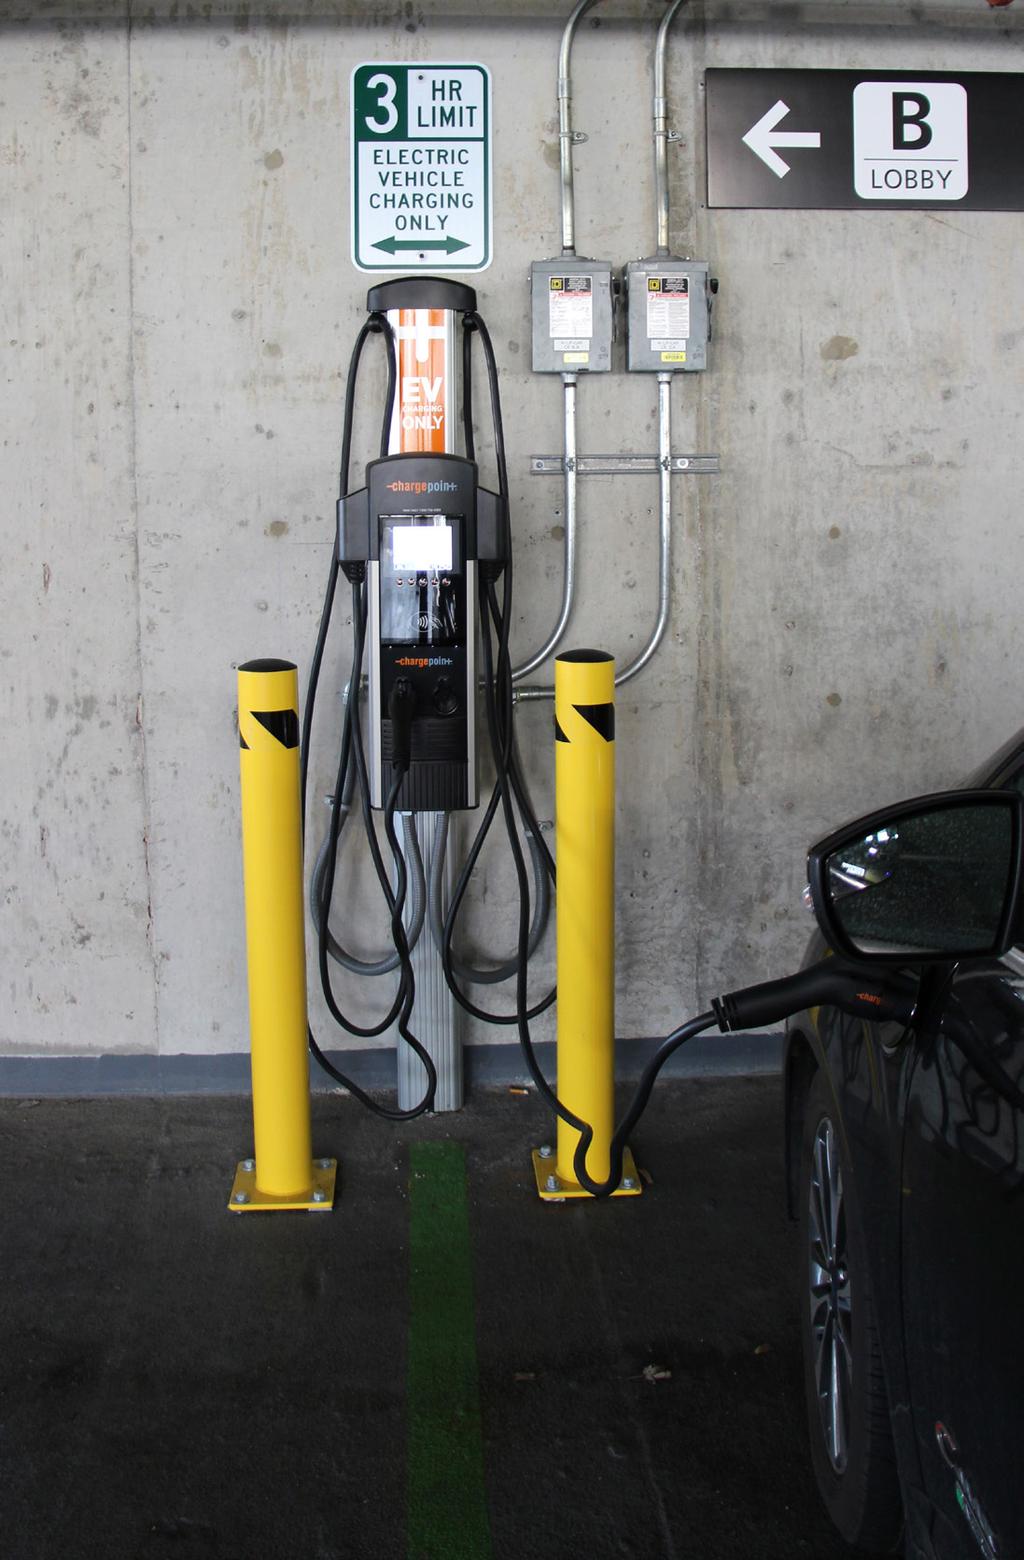 sustainnu Electric Vehicle Charging Infrastructure Upgrade Project Case Study Executive Summary Northwestern University is committed to fostering environmental and ethical stewardship.